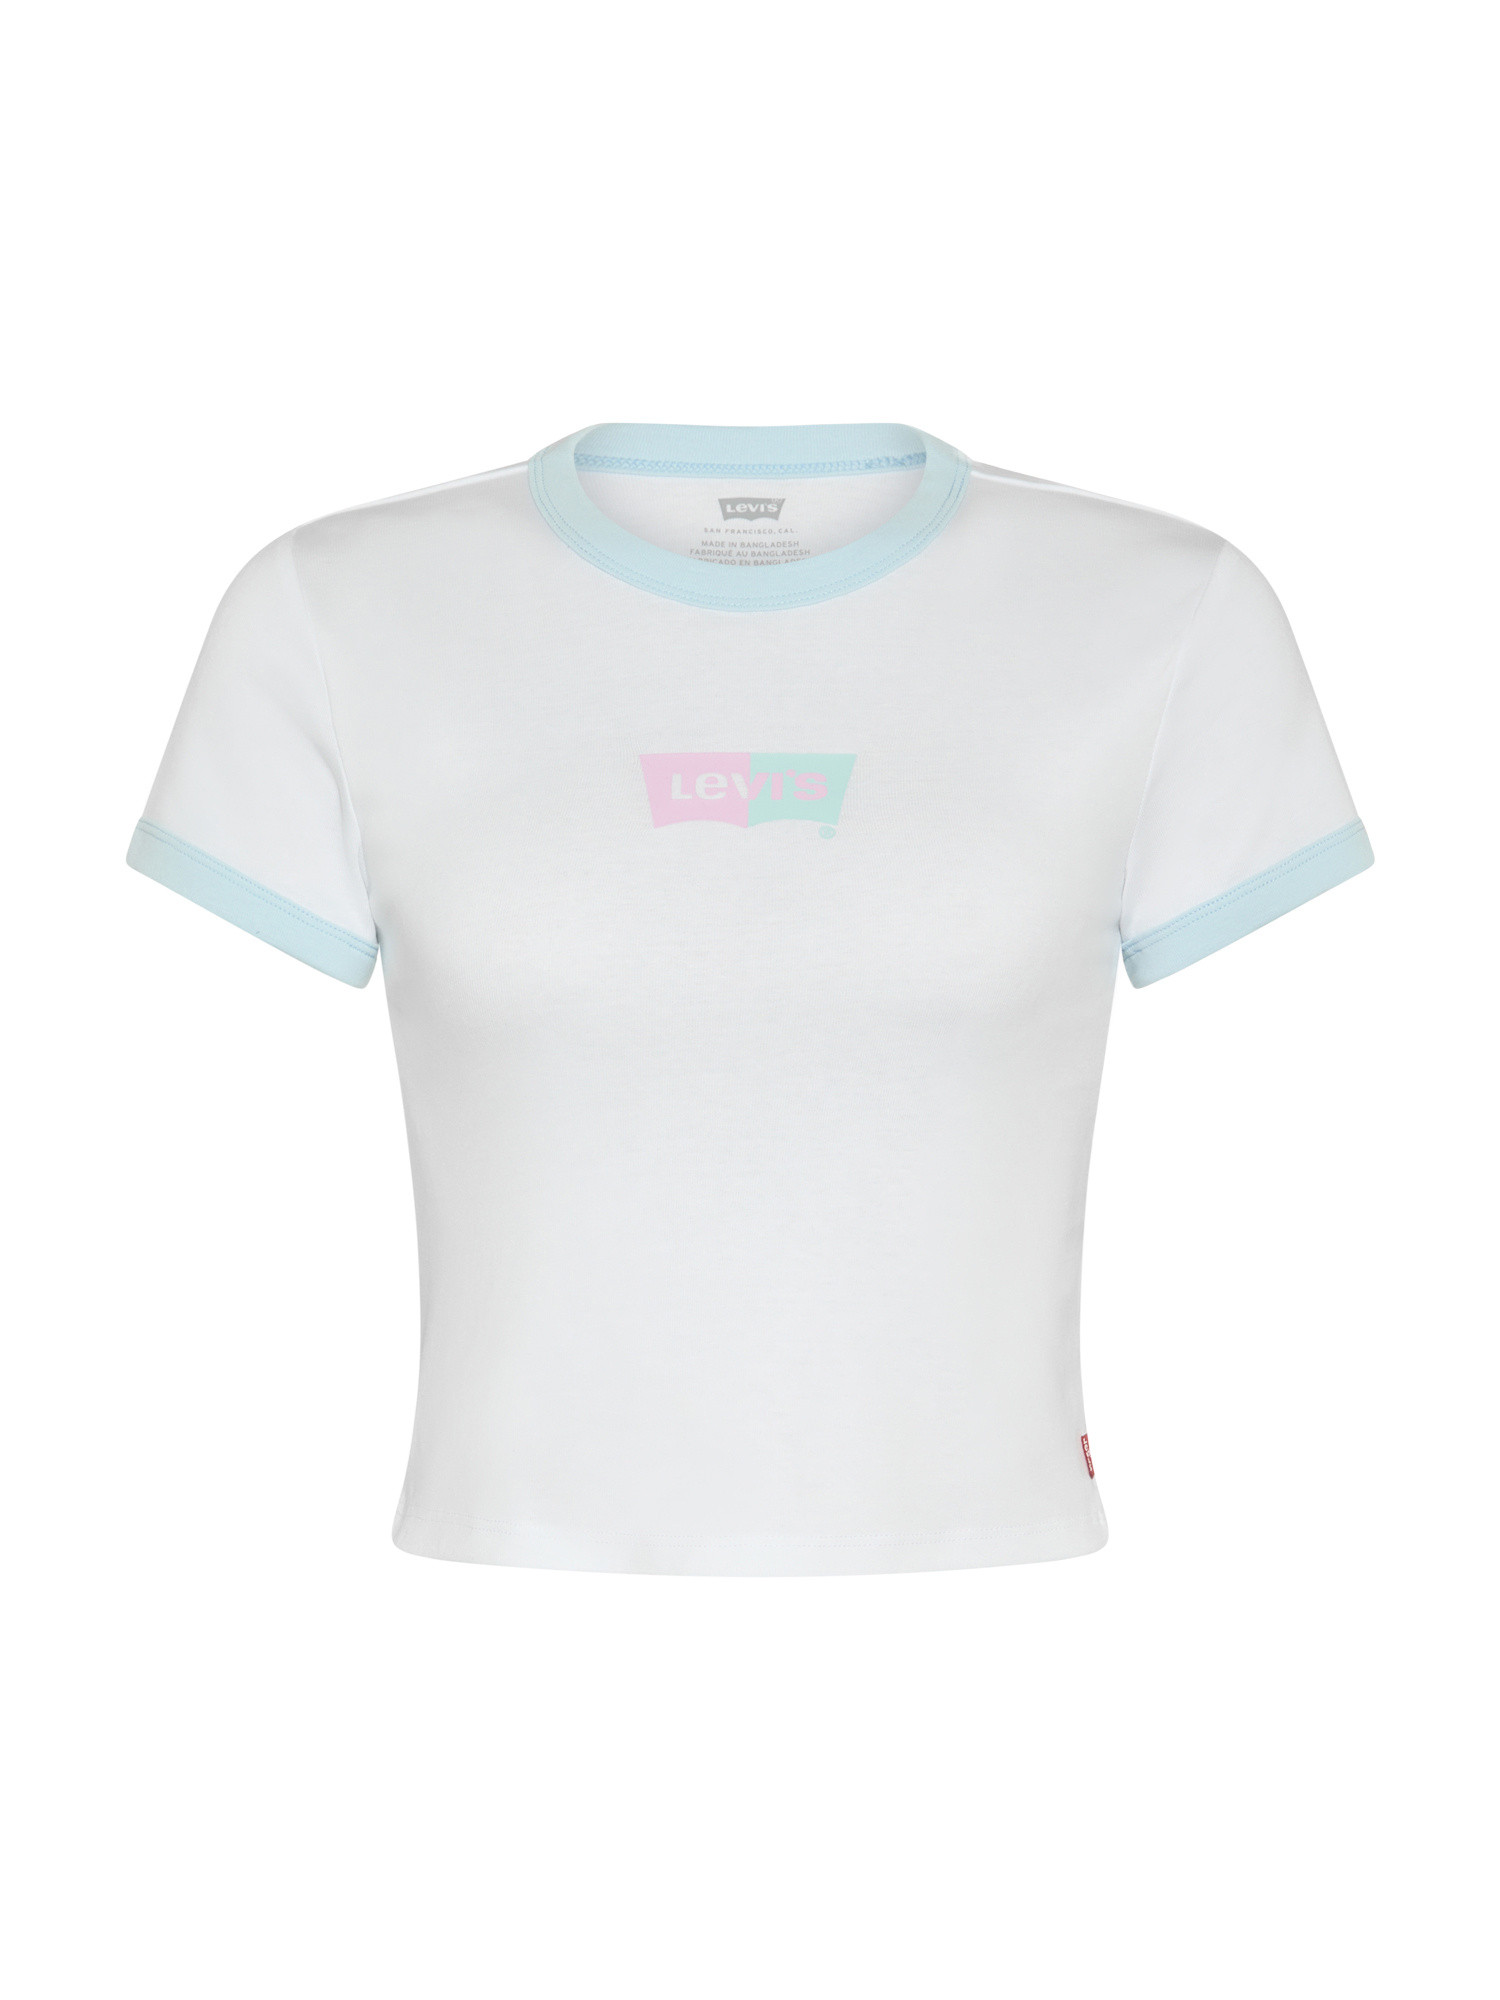 Levi's - Slim fit cotton crop T-shirt with logo, White, large image number 0